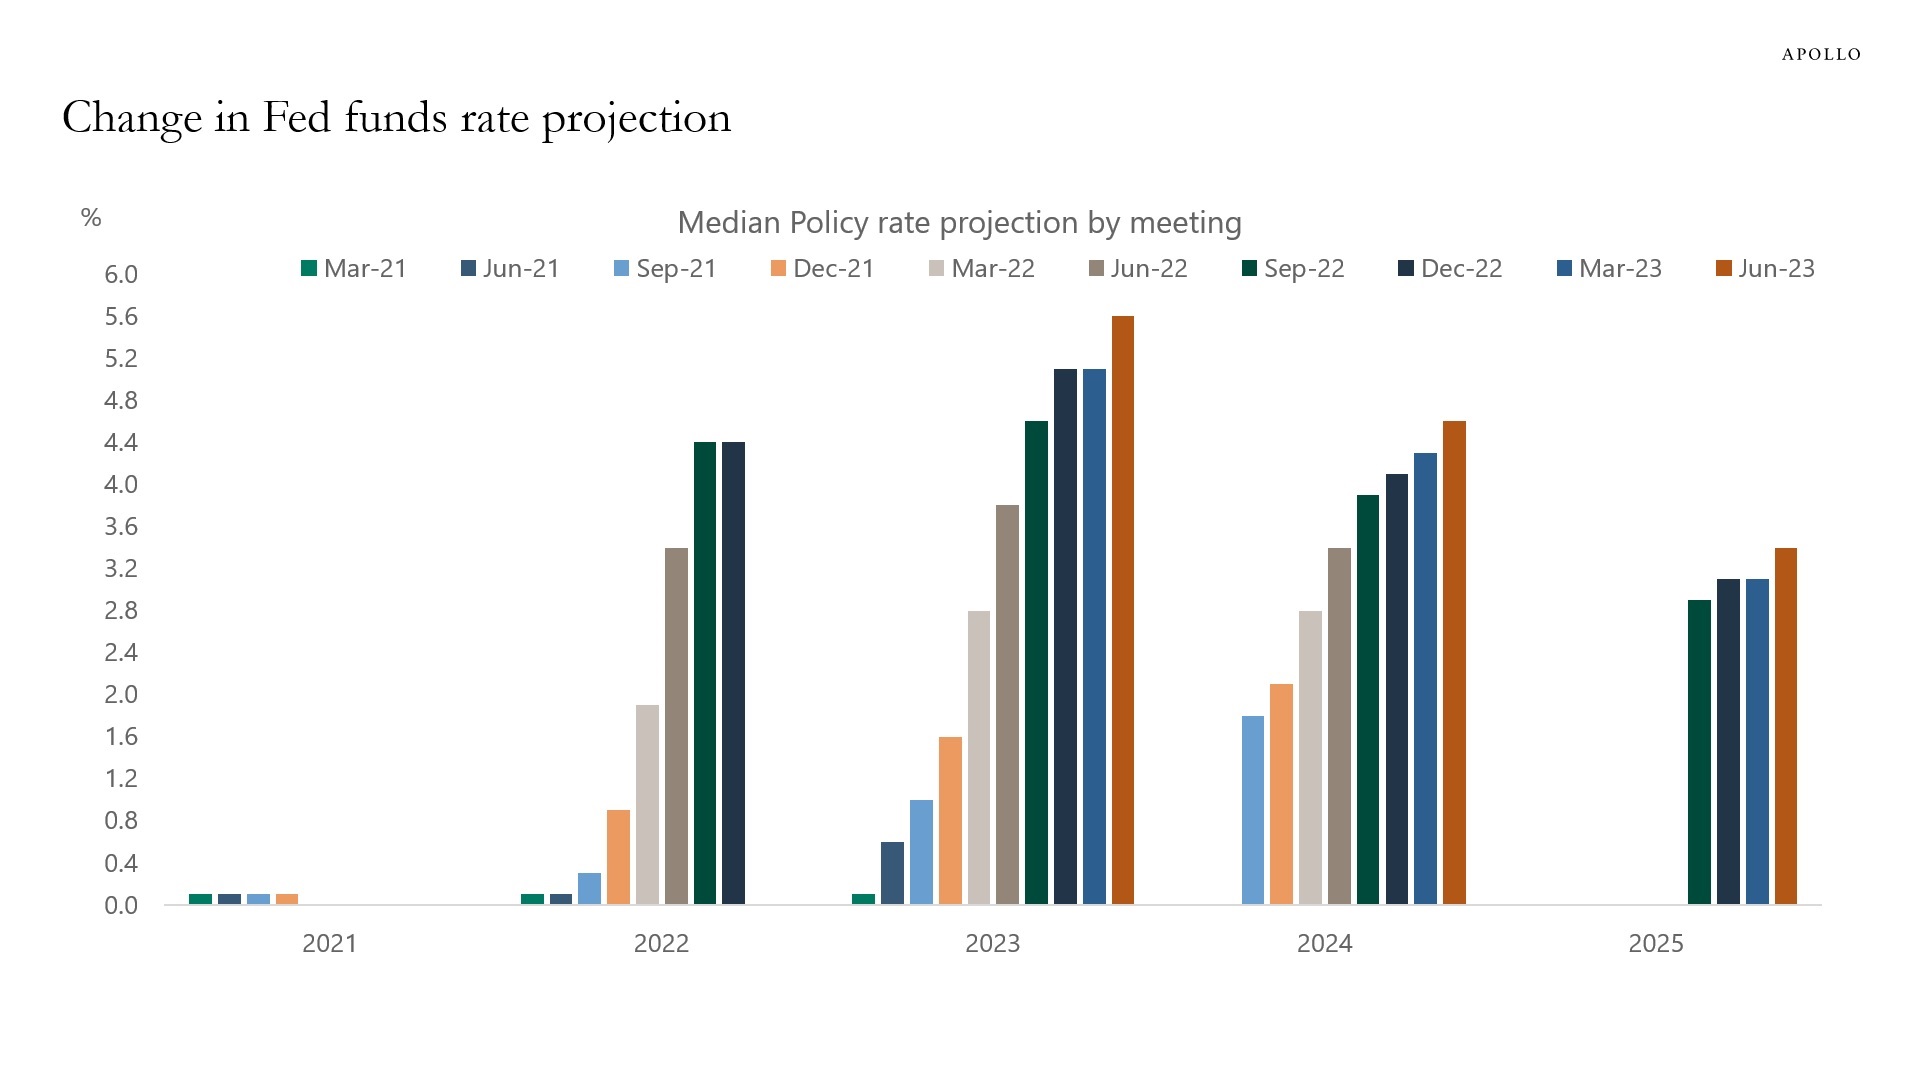 Fed funds rate projections change